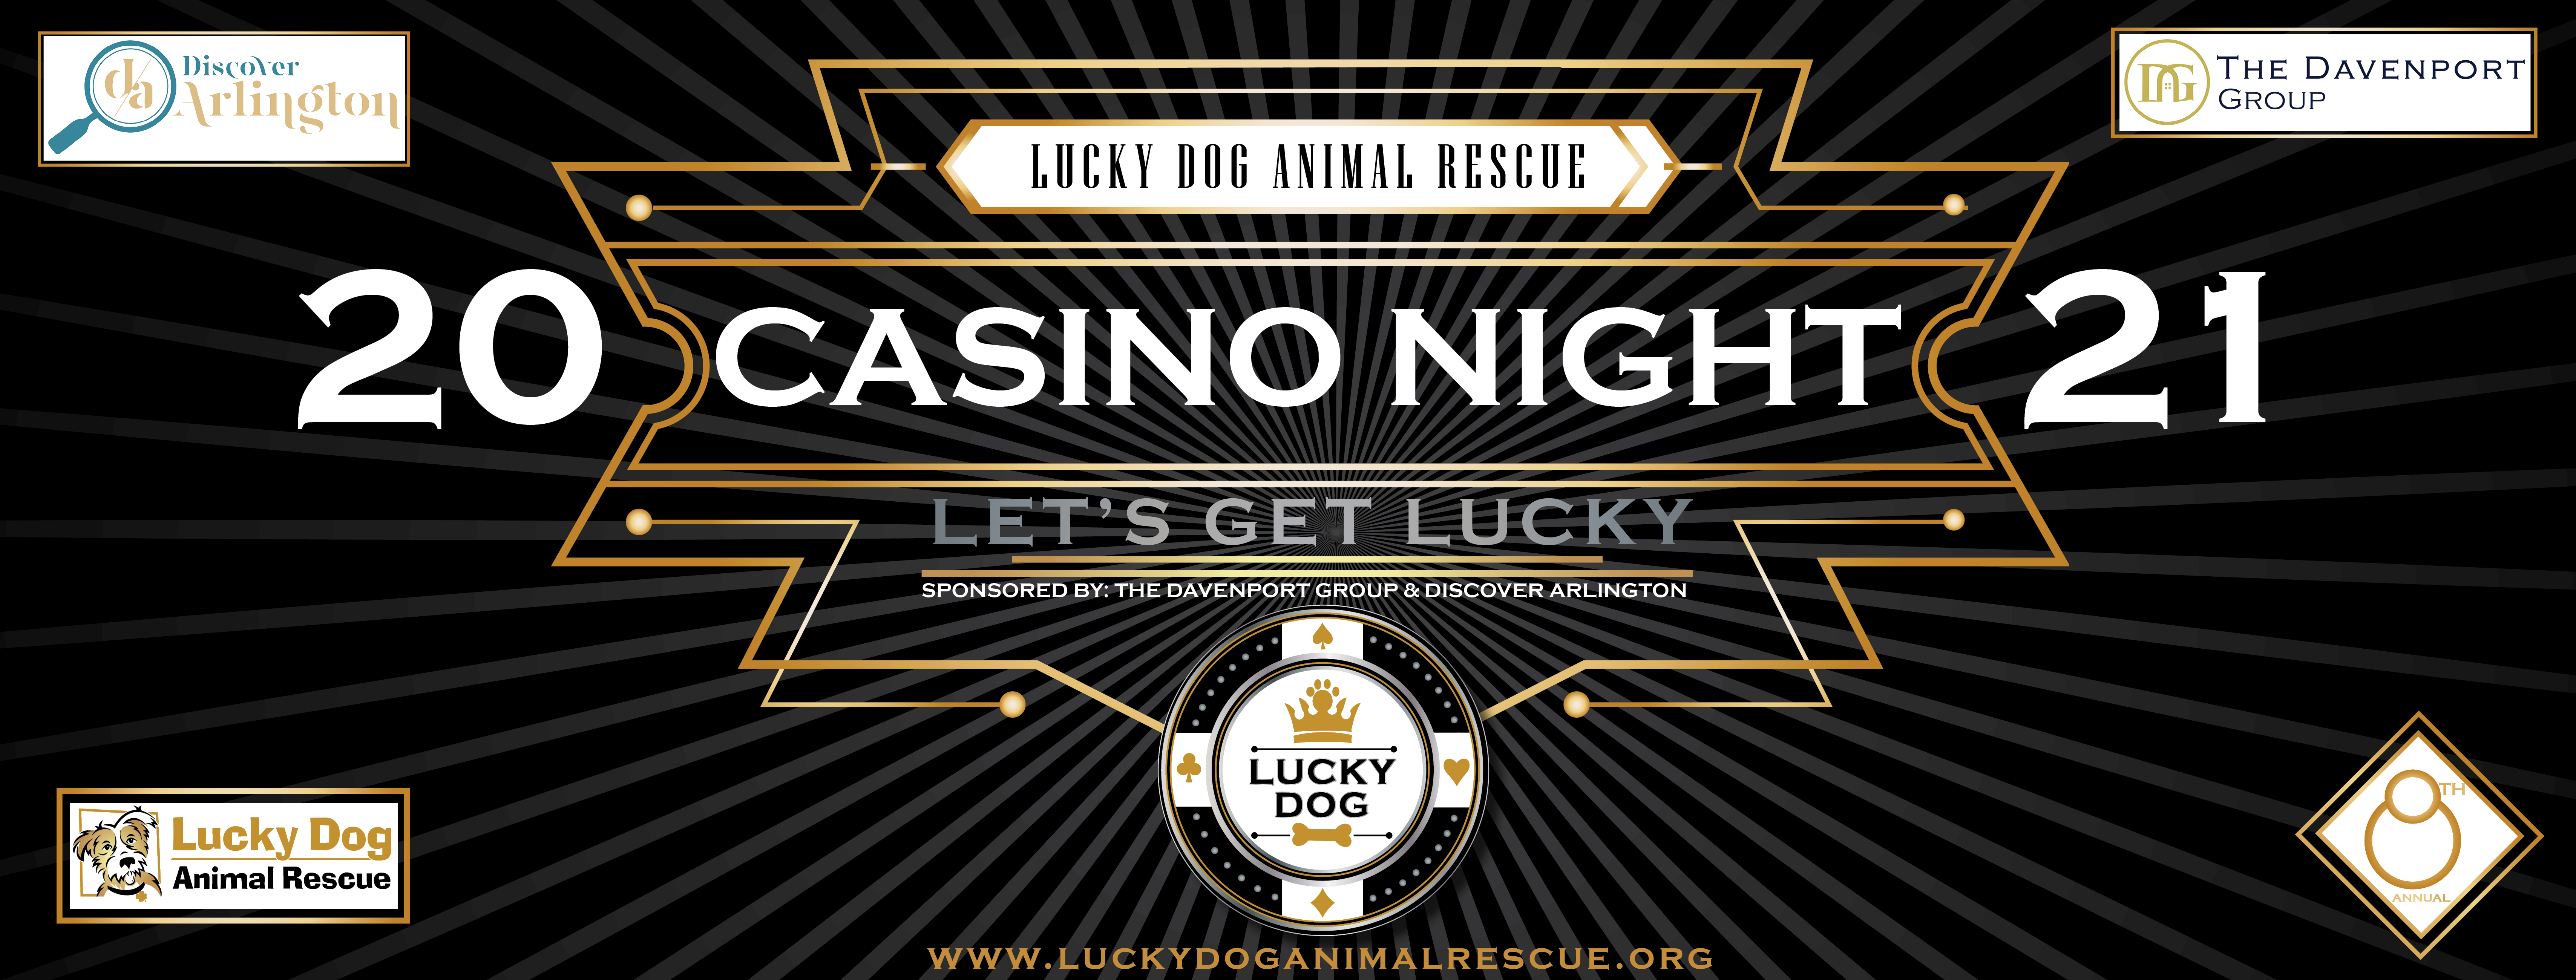 Let's Get Lucky - Casino Night!